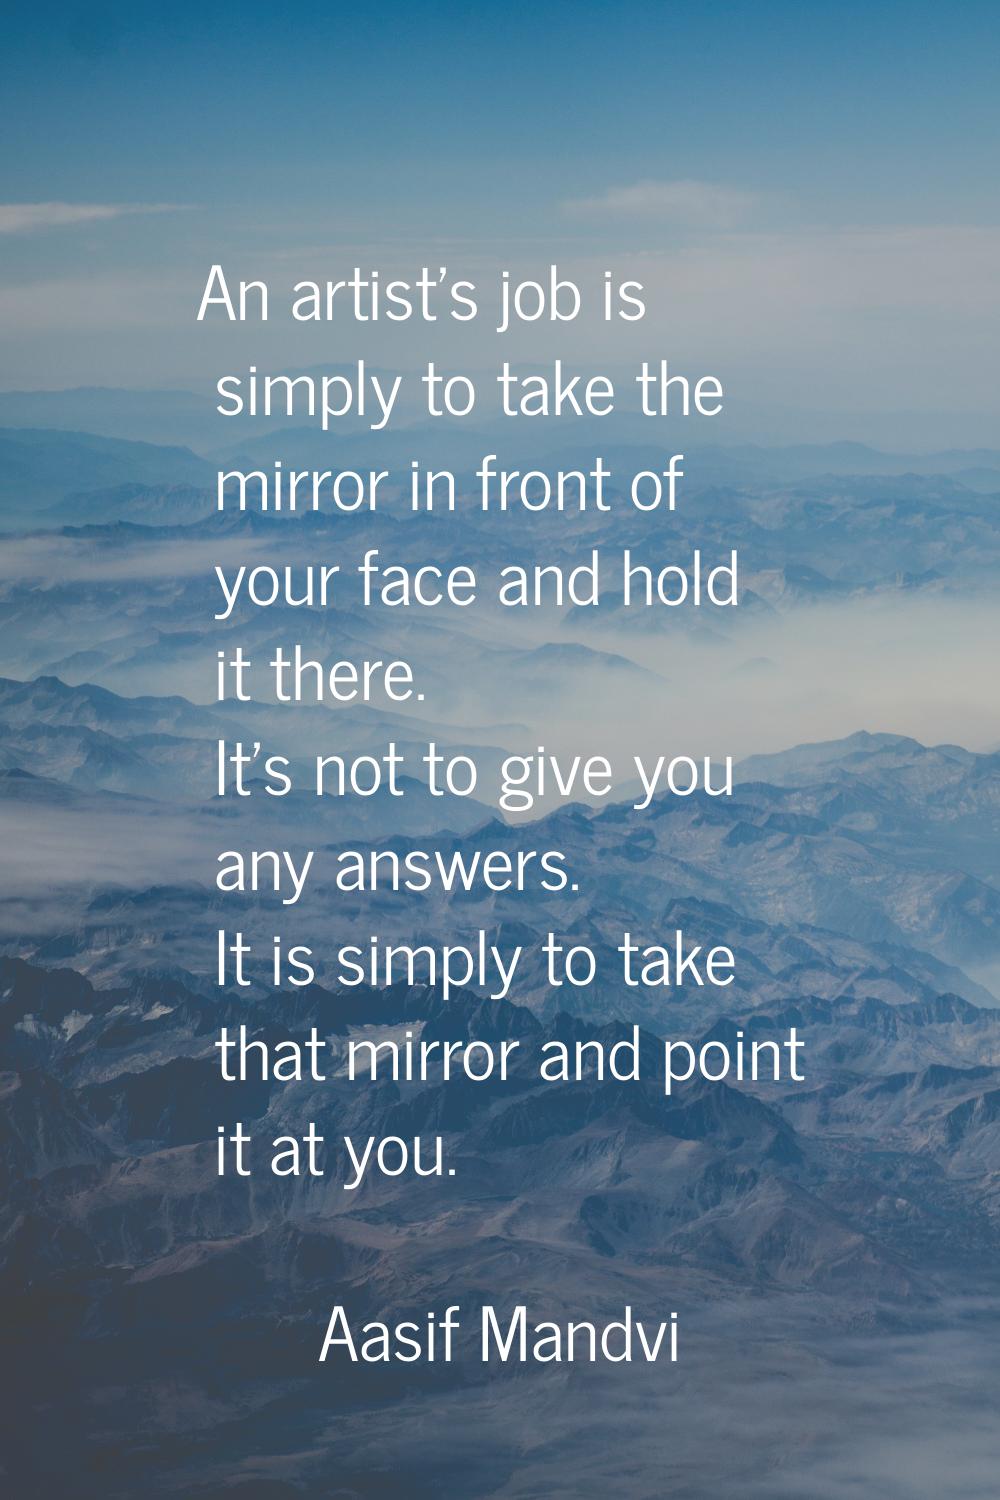 An artist's job is simply to take the mirror in front of your face and hold it there. It's not to g